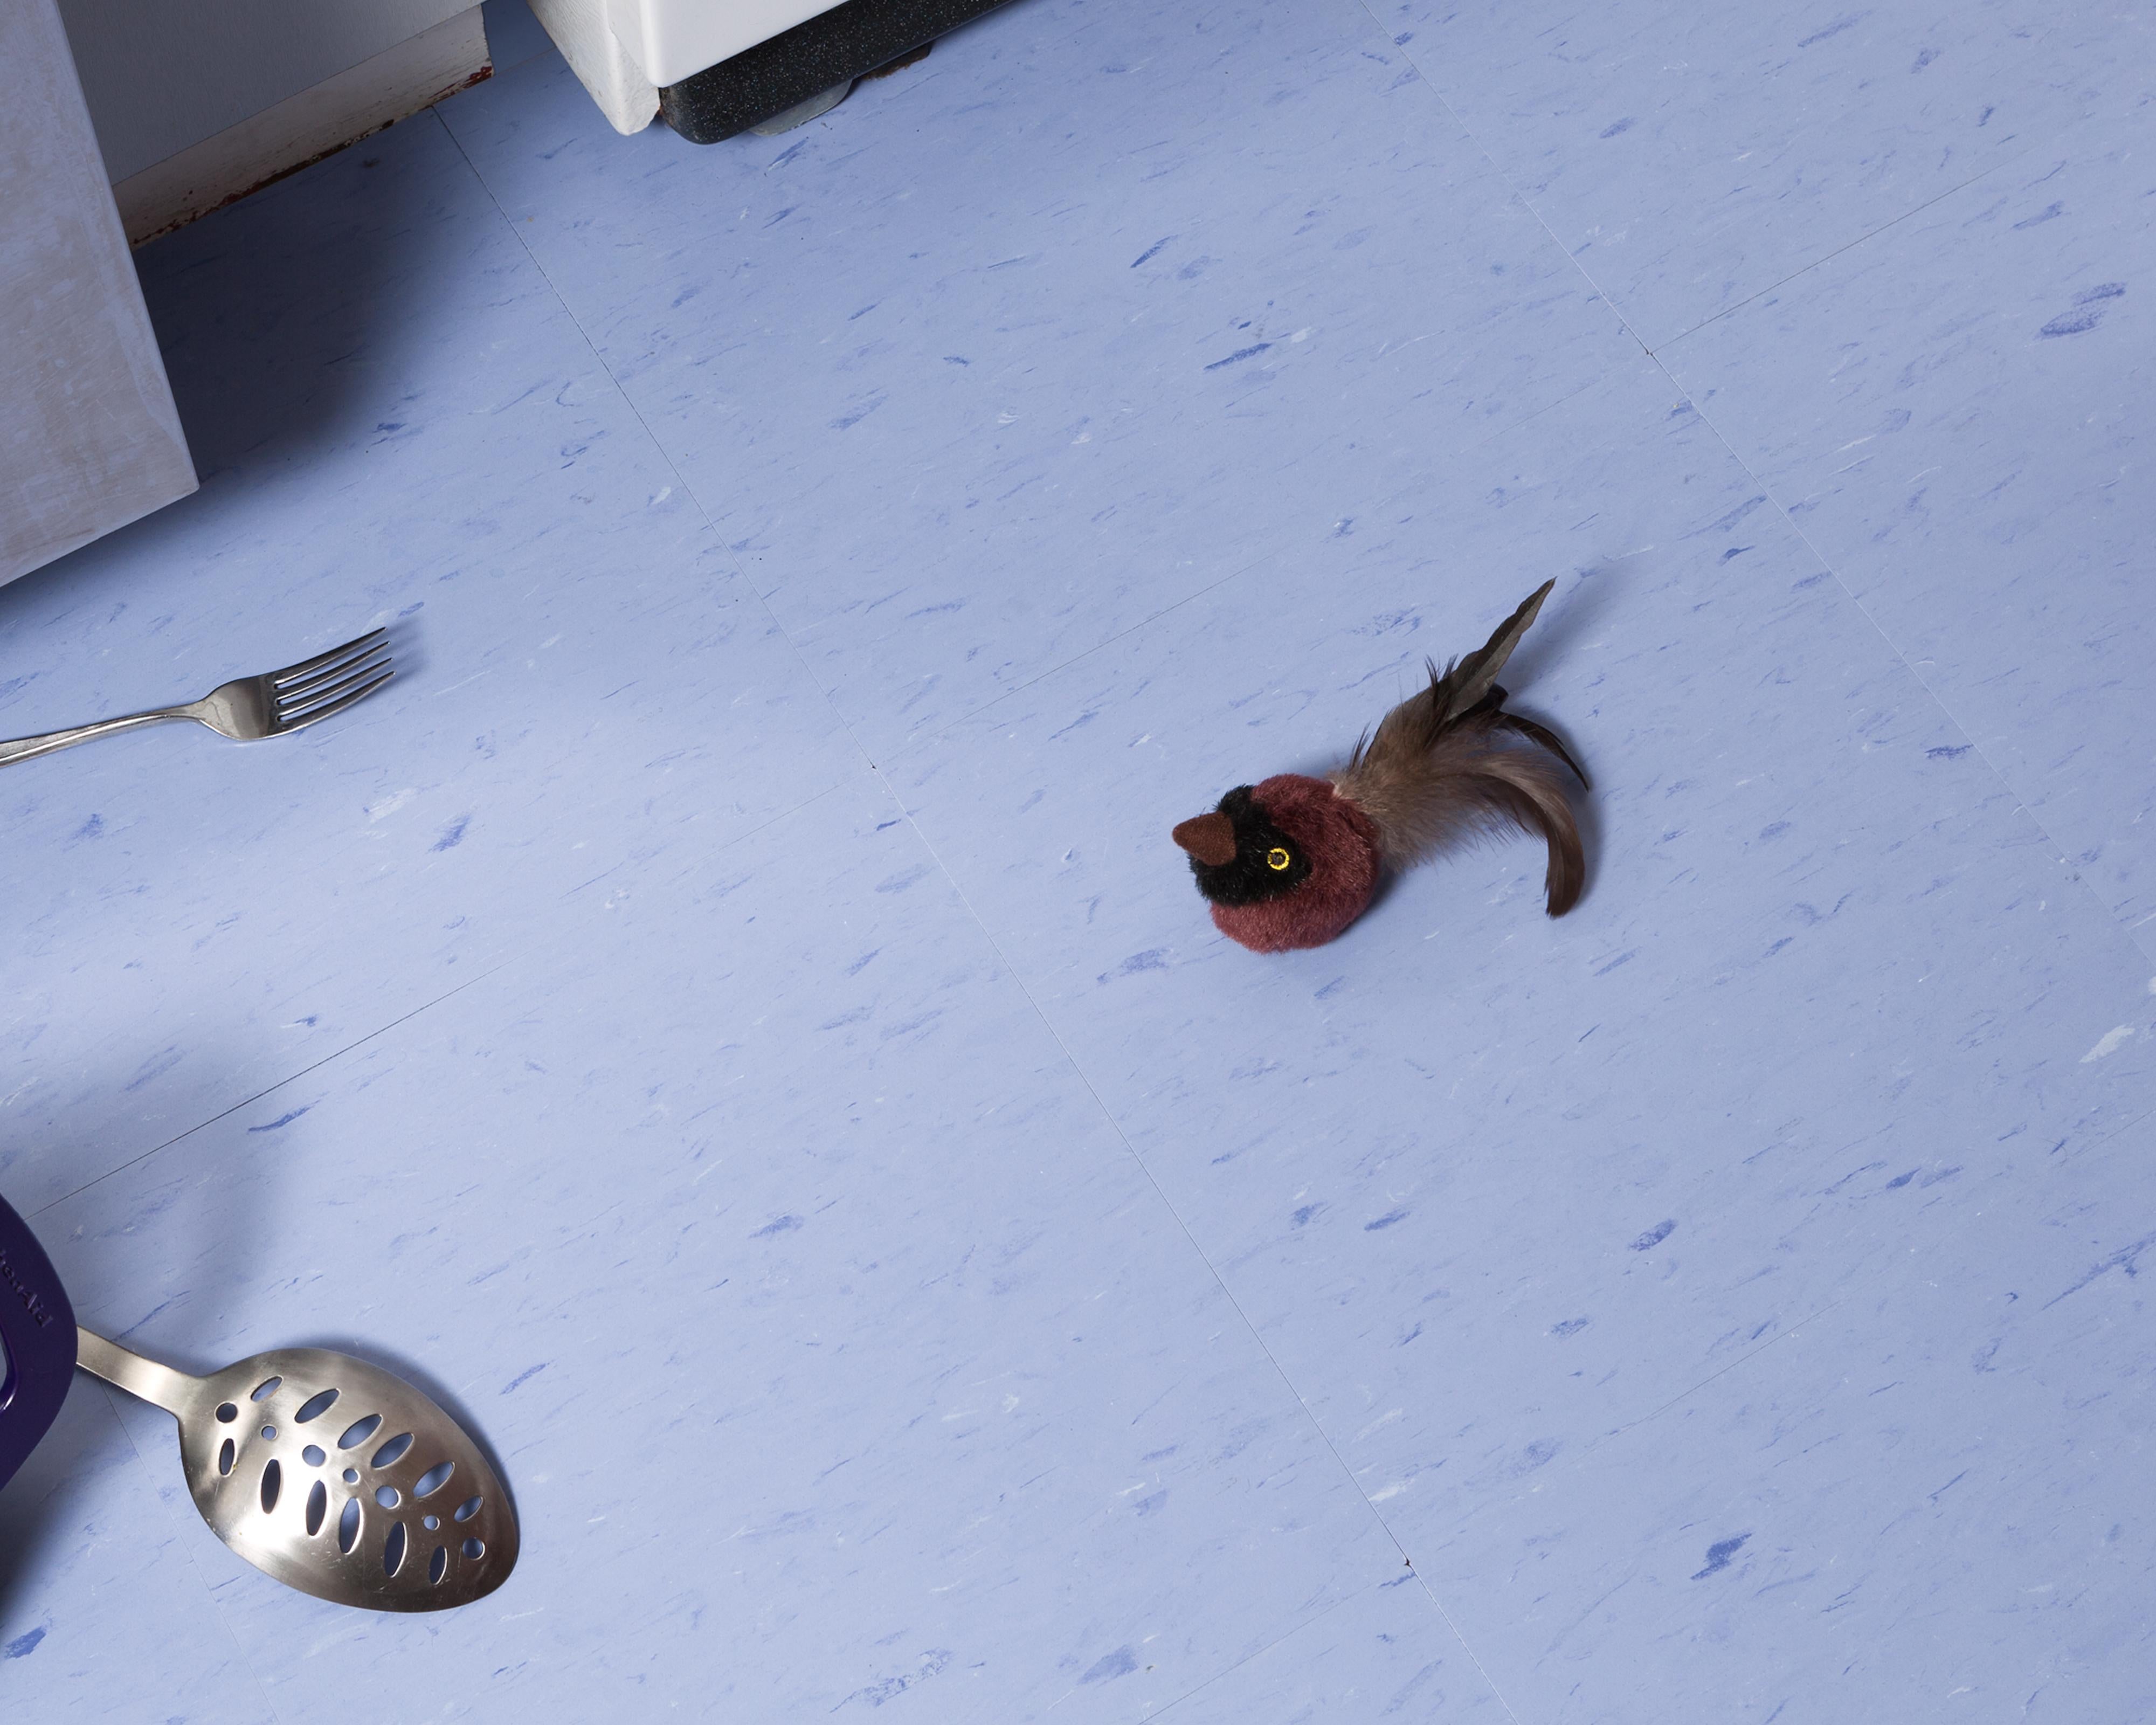 “Morbidity & Mortality: Bird Head” Humorous Photo of Cat Toy in Crime Scene  - Print by Jeanette May